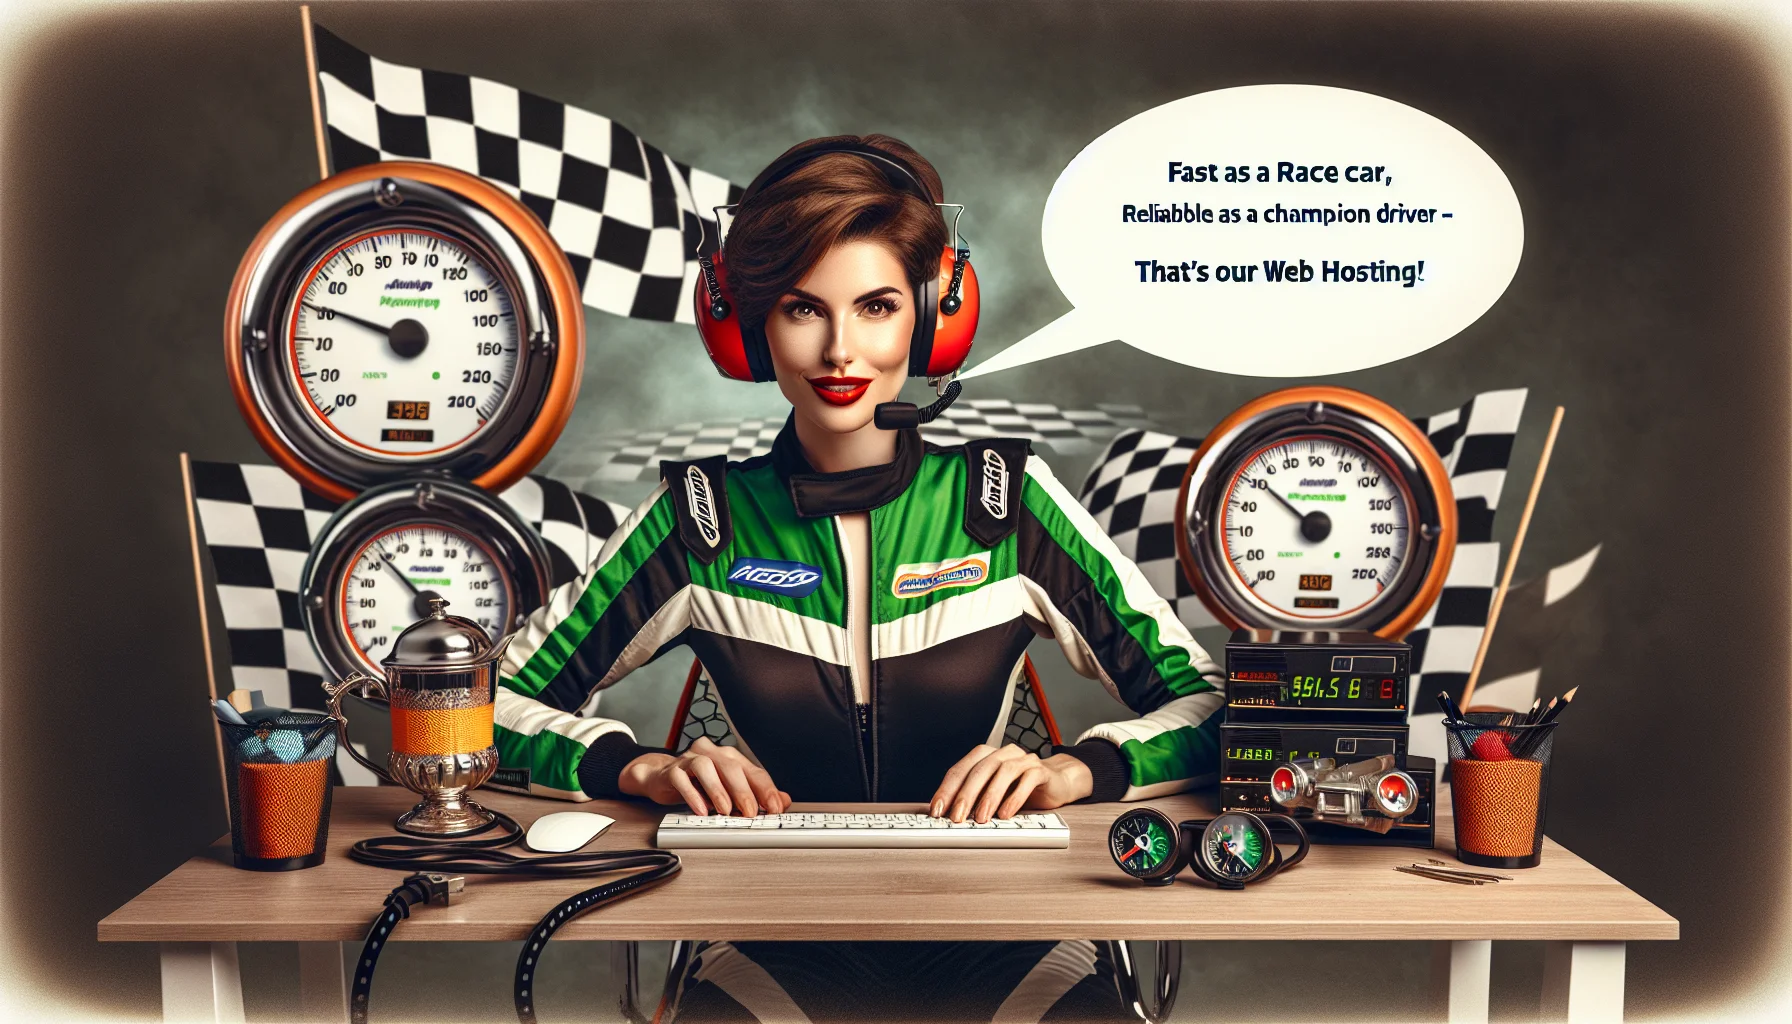 Generate a playful image of a sporty woman with short brown hair, in a humorous situation encouraging web hosting. She is attired in a racing jumpsuit with vibrant green accents, seated behind a sleek computer setup surrounded by speedometers, race car decals, and checkered flags. A speech bubble coming from her reads: 'Fast as a race car, reliable as a champion driver - that's our web hosting!'. The image should possess a captivating balance of humor, the rush of motorsports, and the technology-driven vibe of web hosting, to create the desired ambiance.